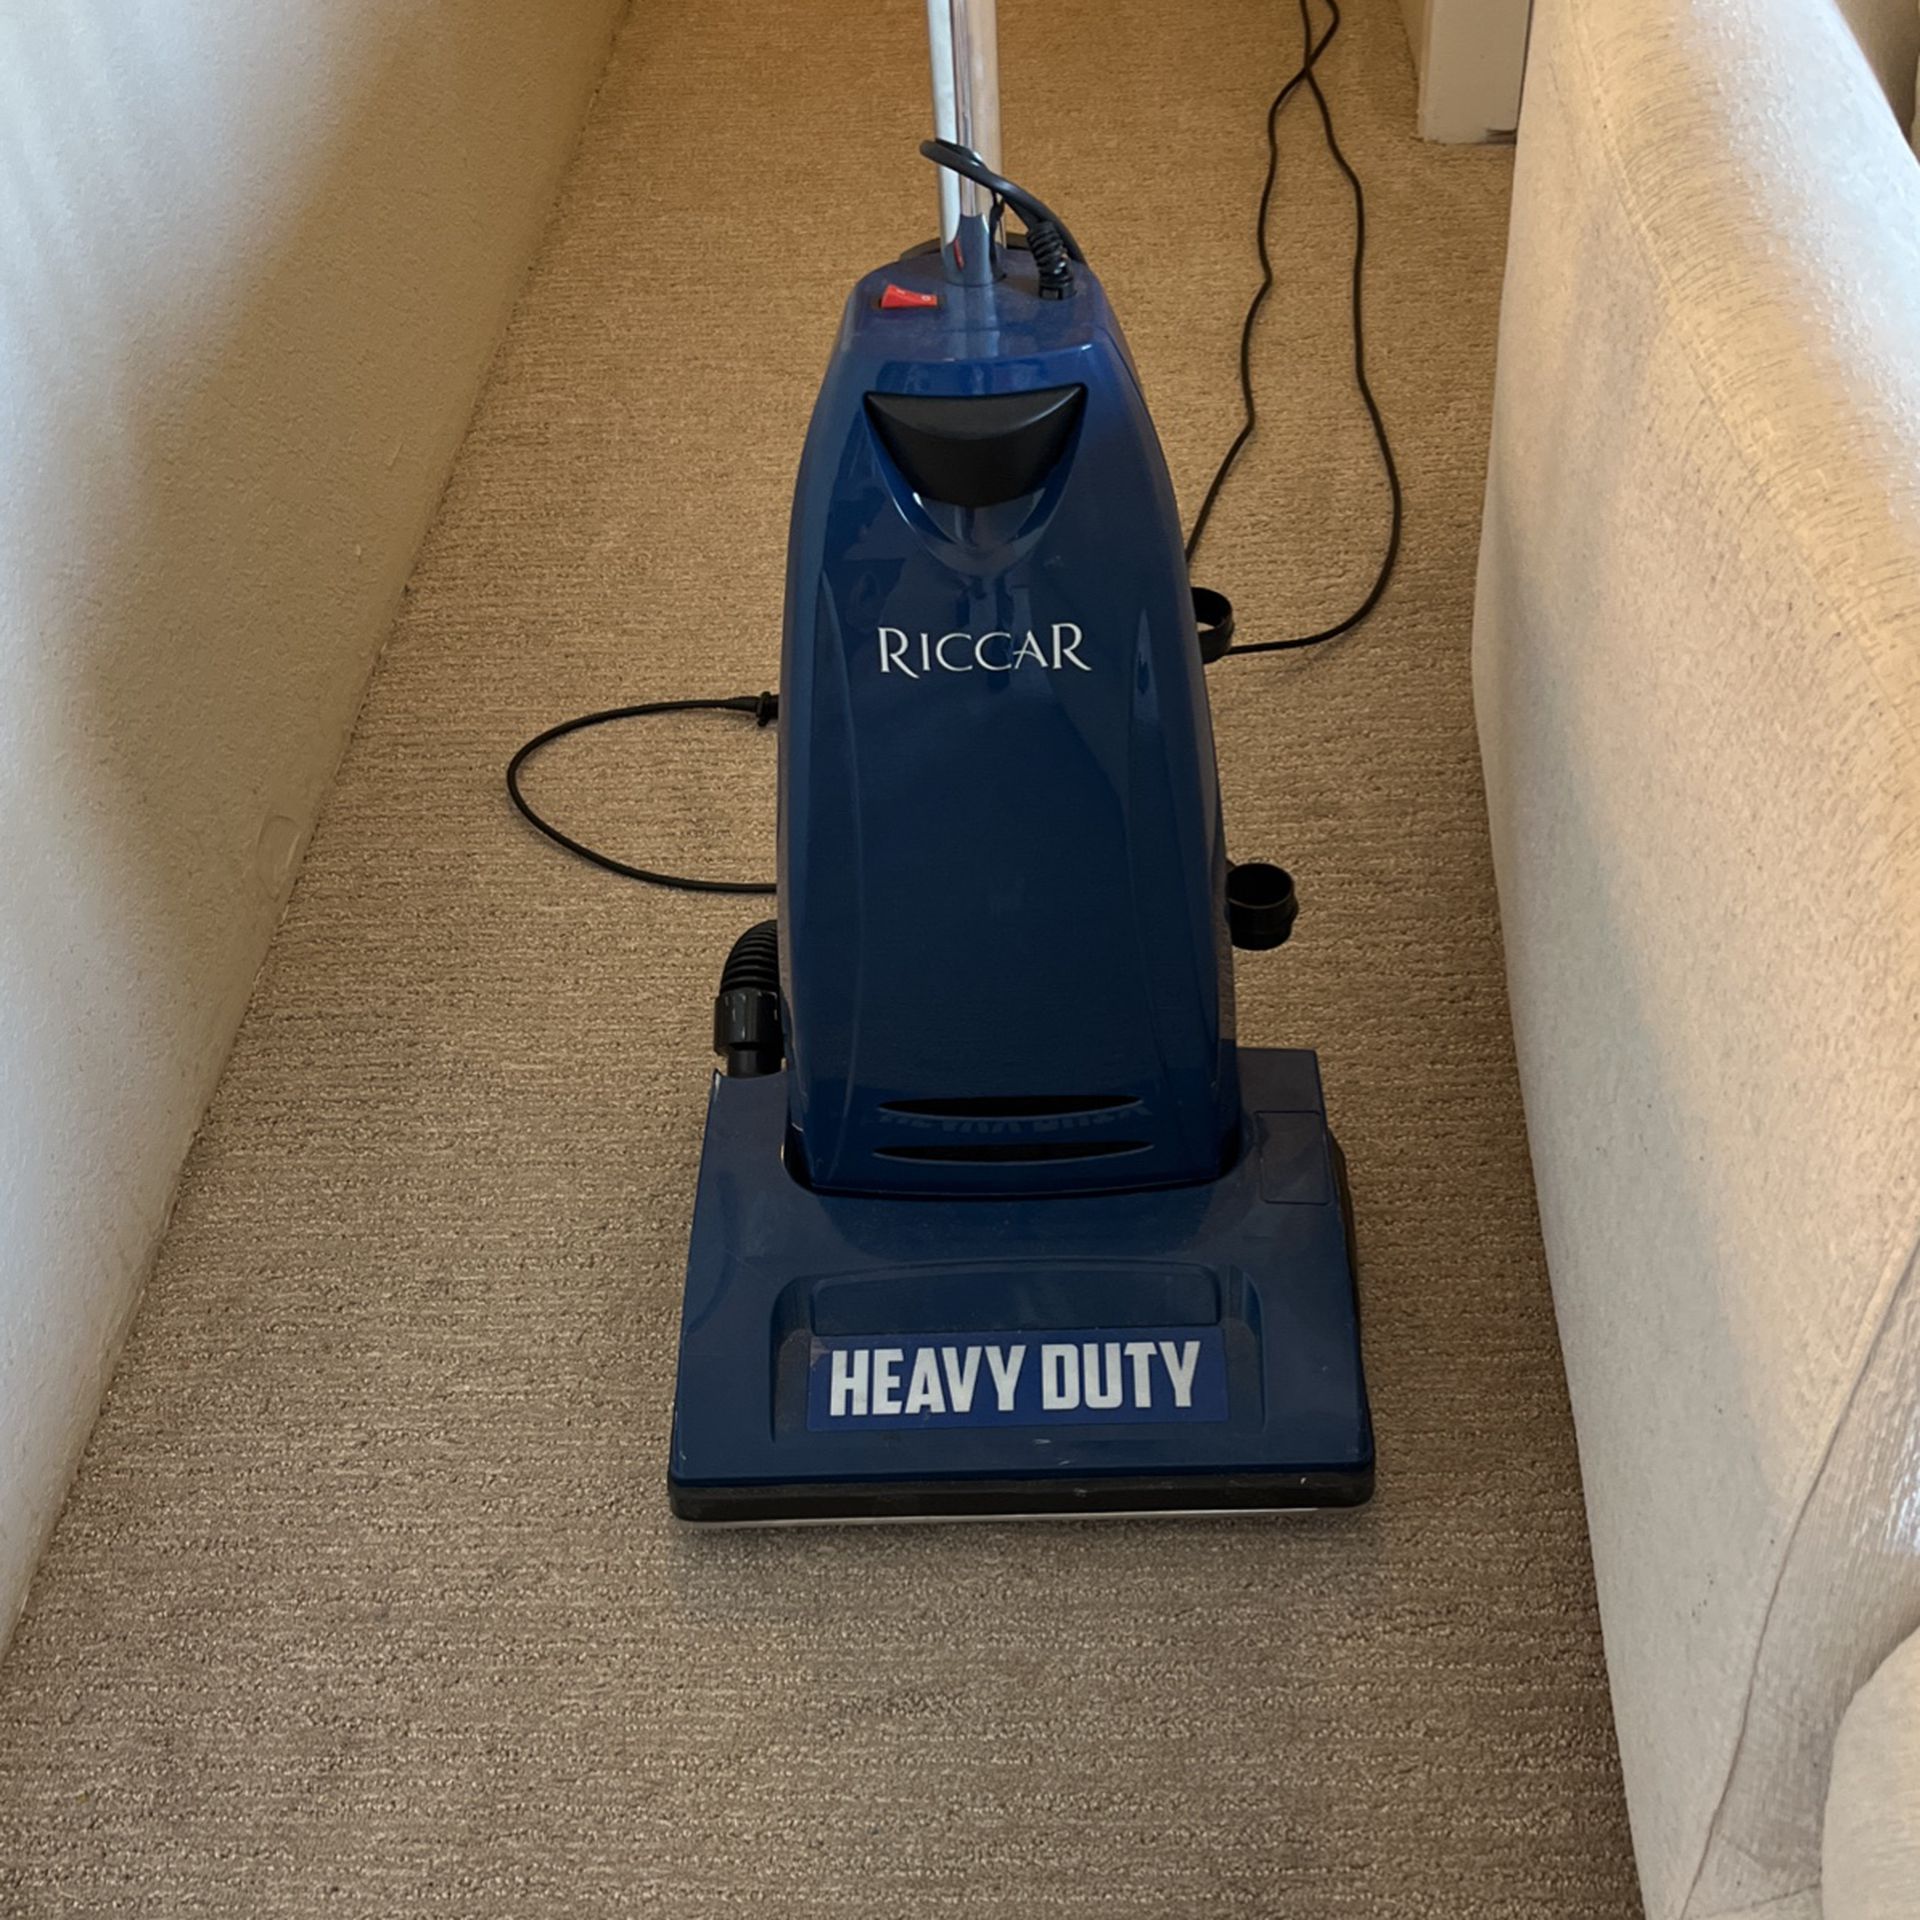 Riccar - Heavy Duty Vacuum - Moving Out Sale